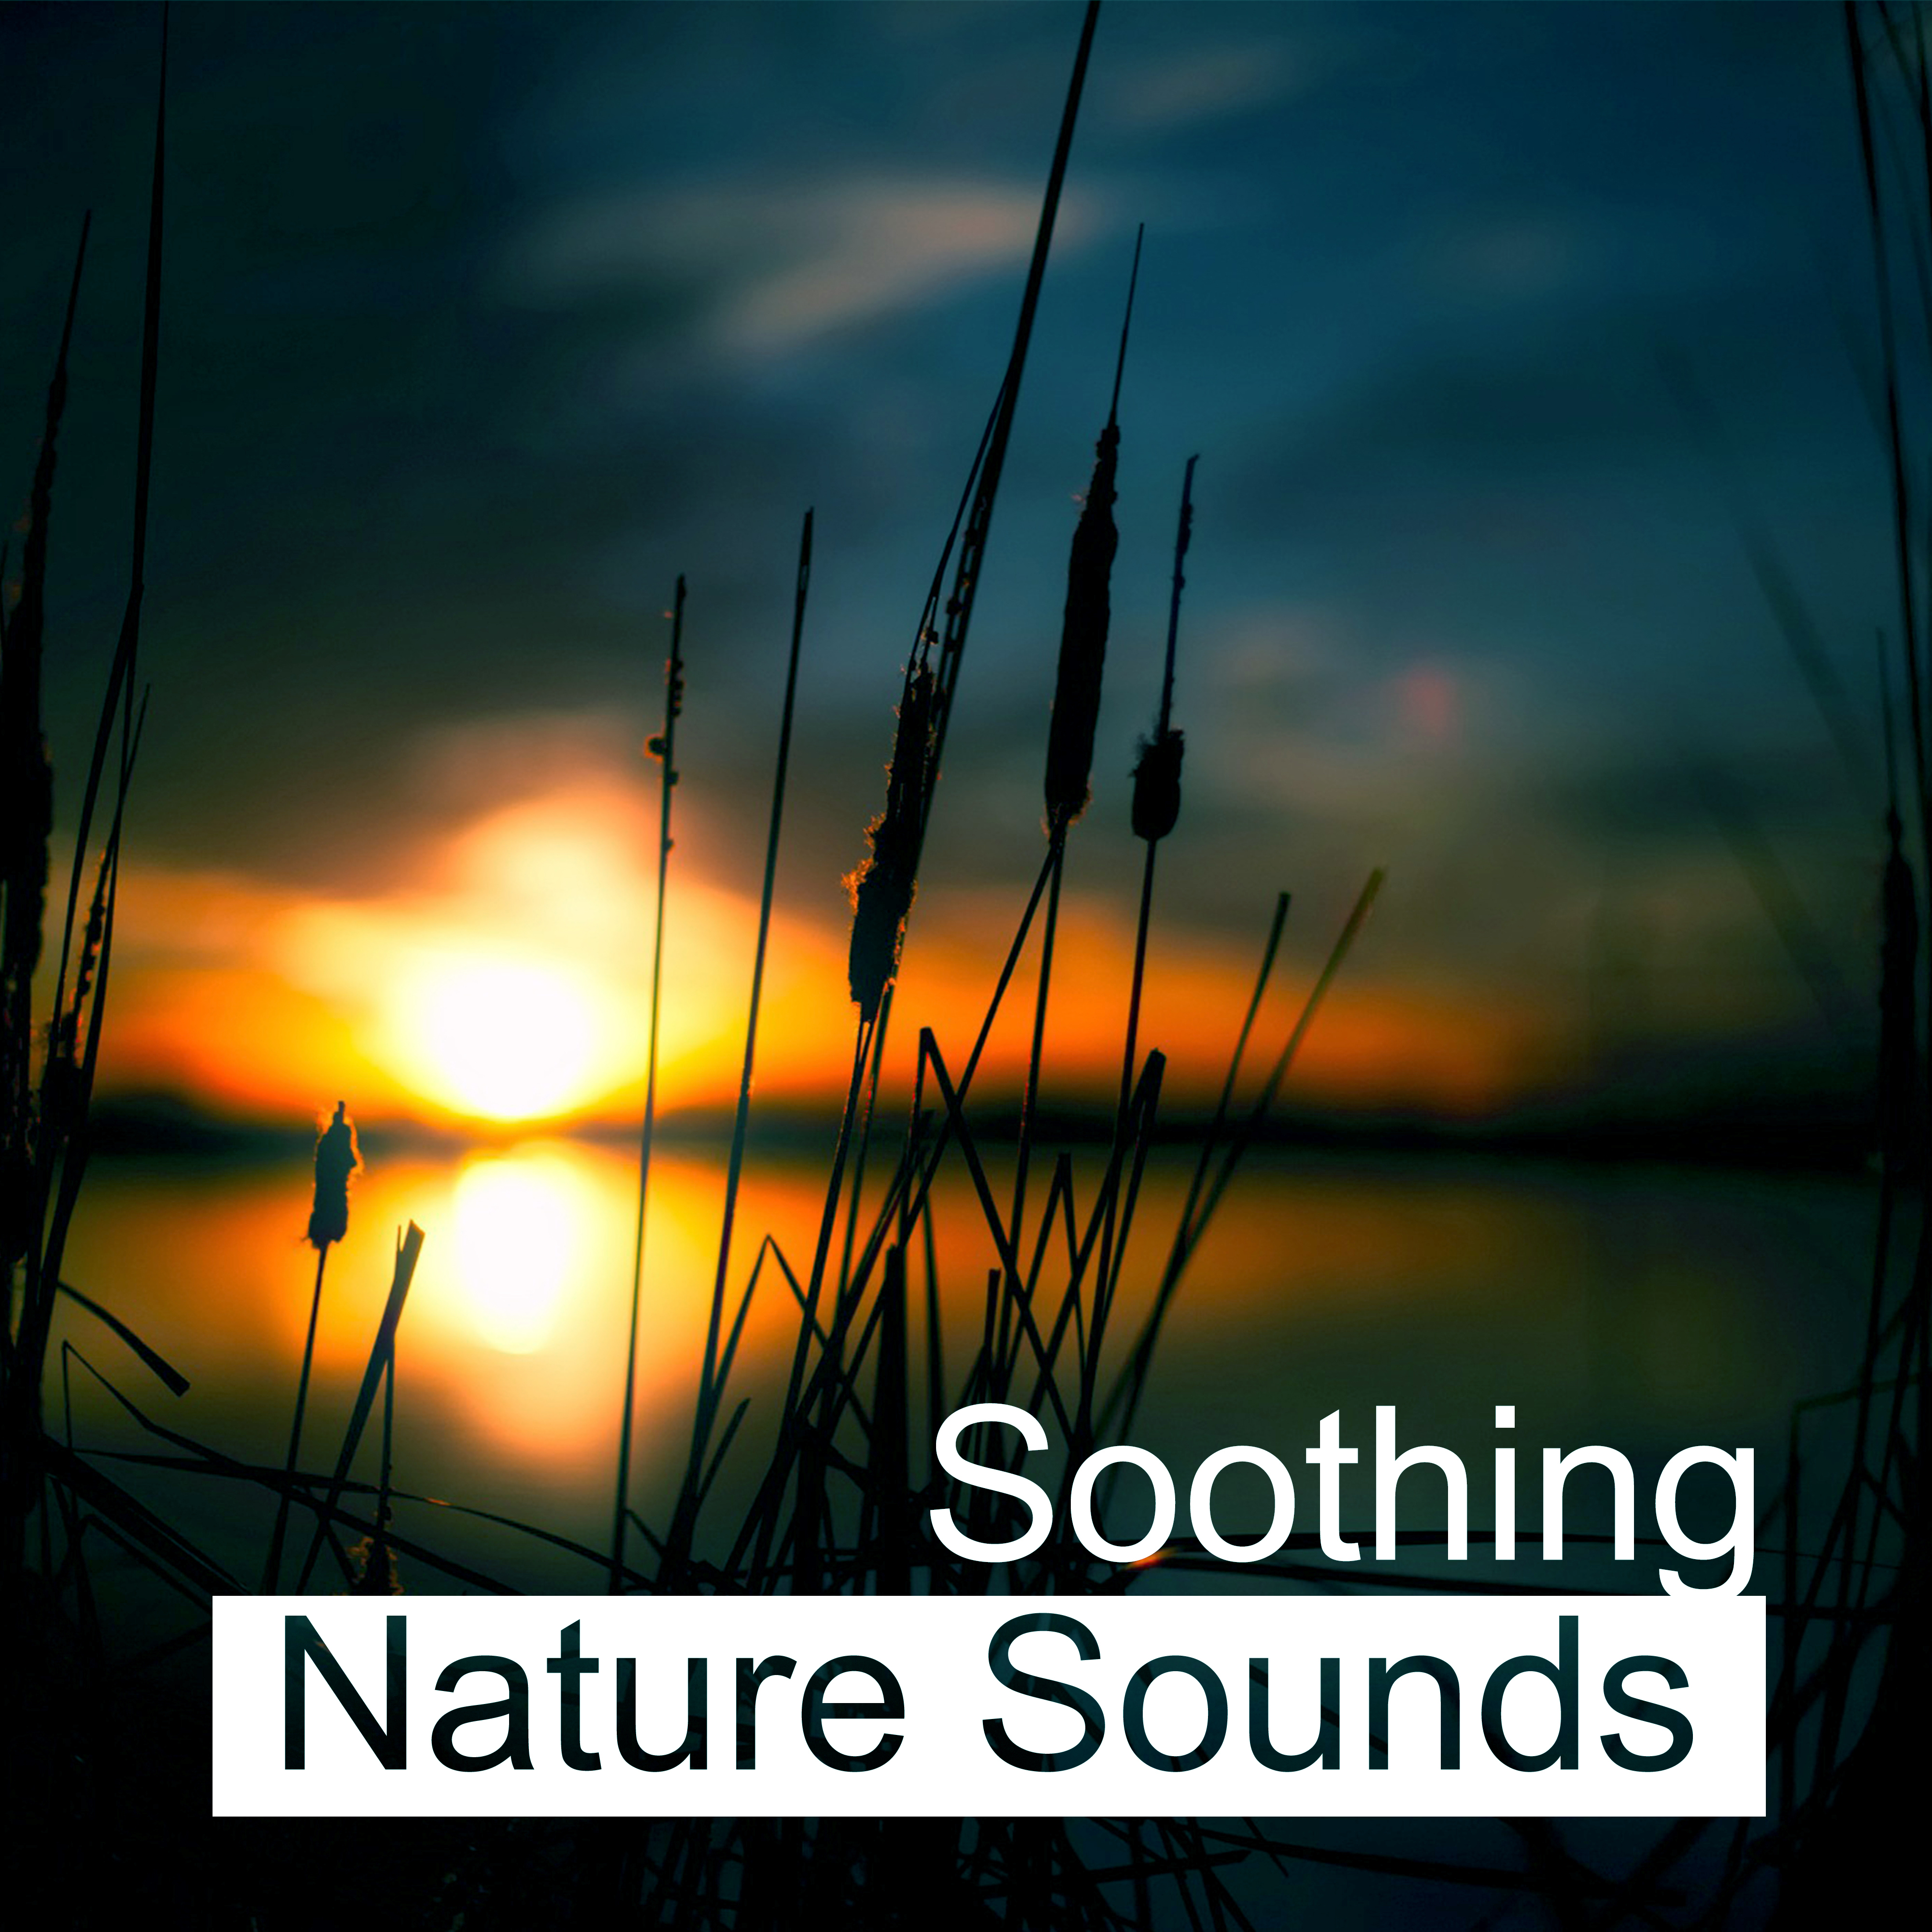 Soothing Nature Sounds  Easy Way to Relax, Rest with Nature Music, Calm Down, Mind Peace